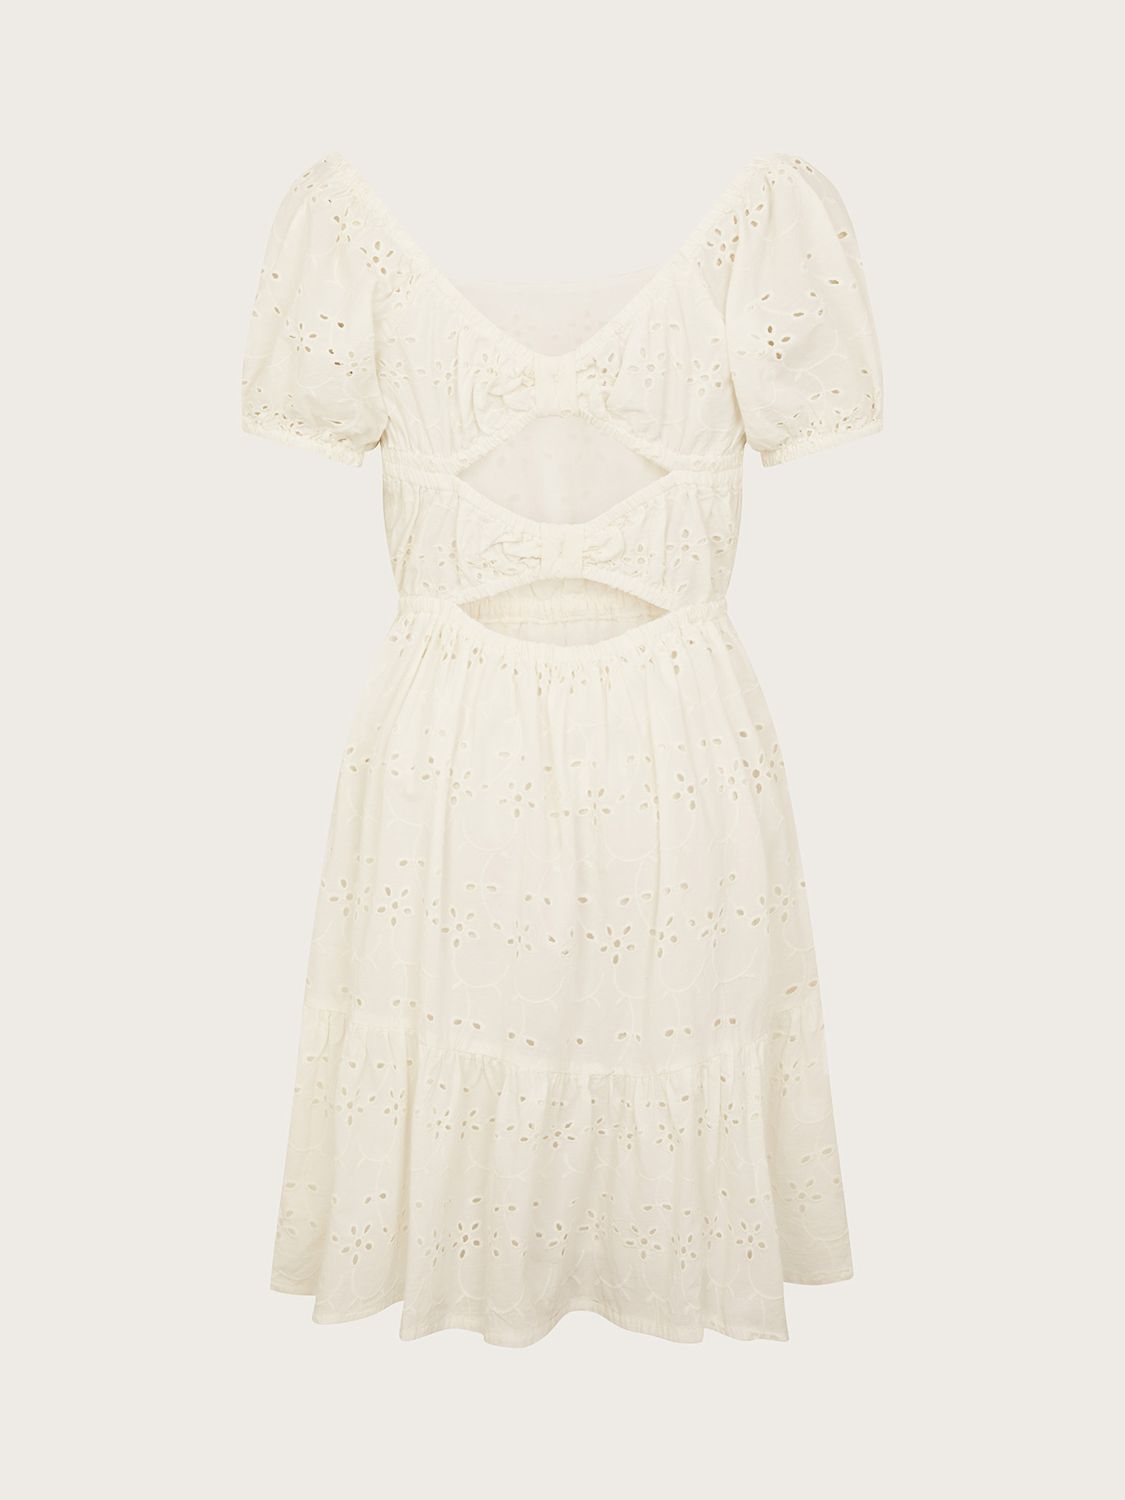 Monsoon Kids' Storm Broderie Bow Dress, Ivory, 7-8 years